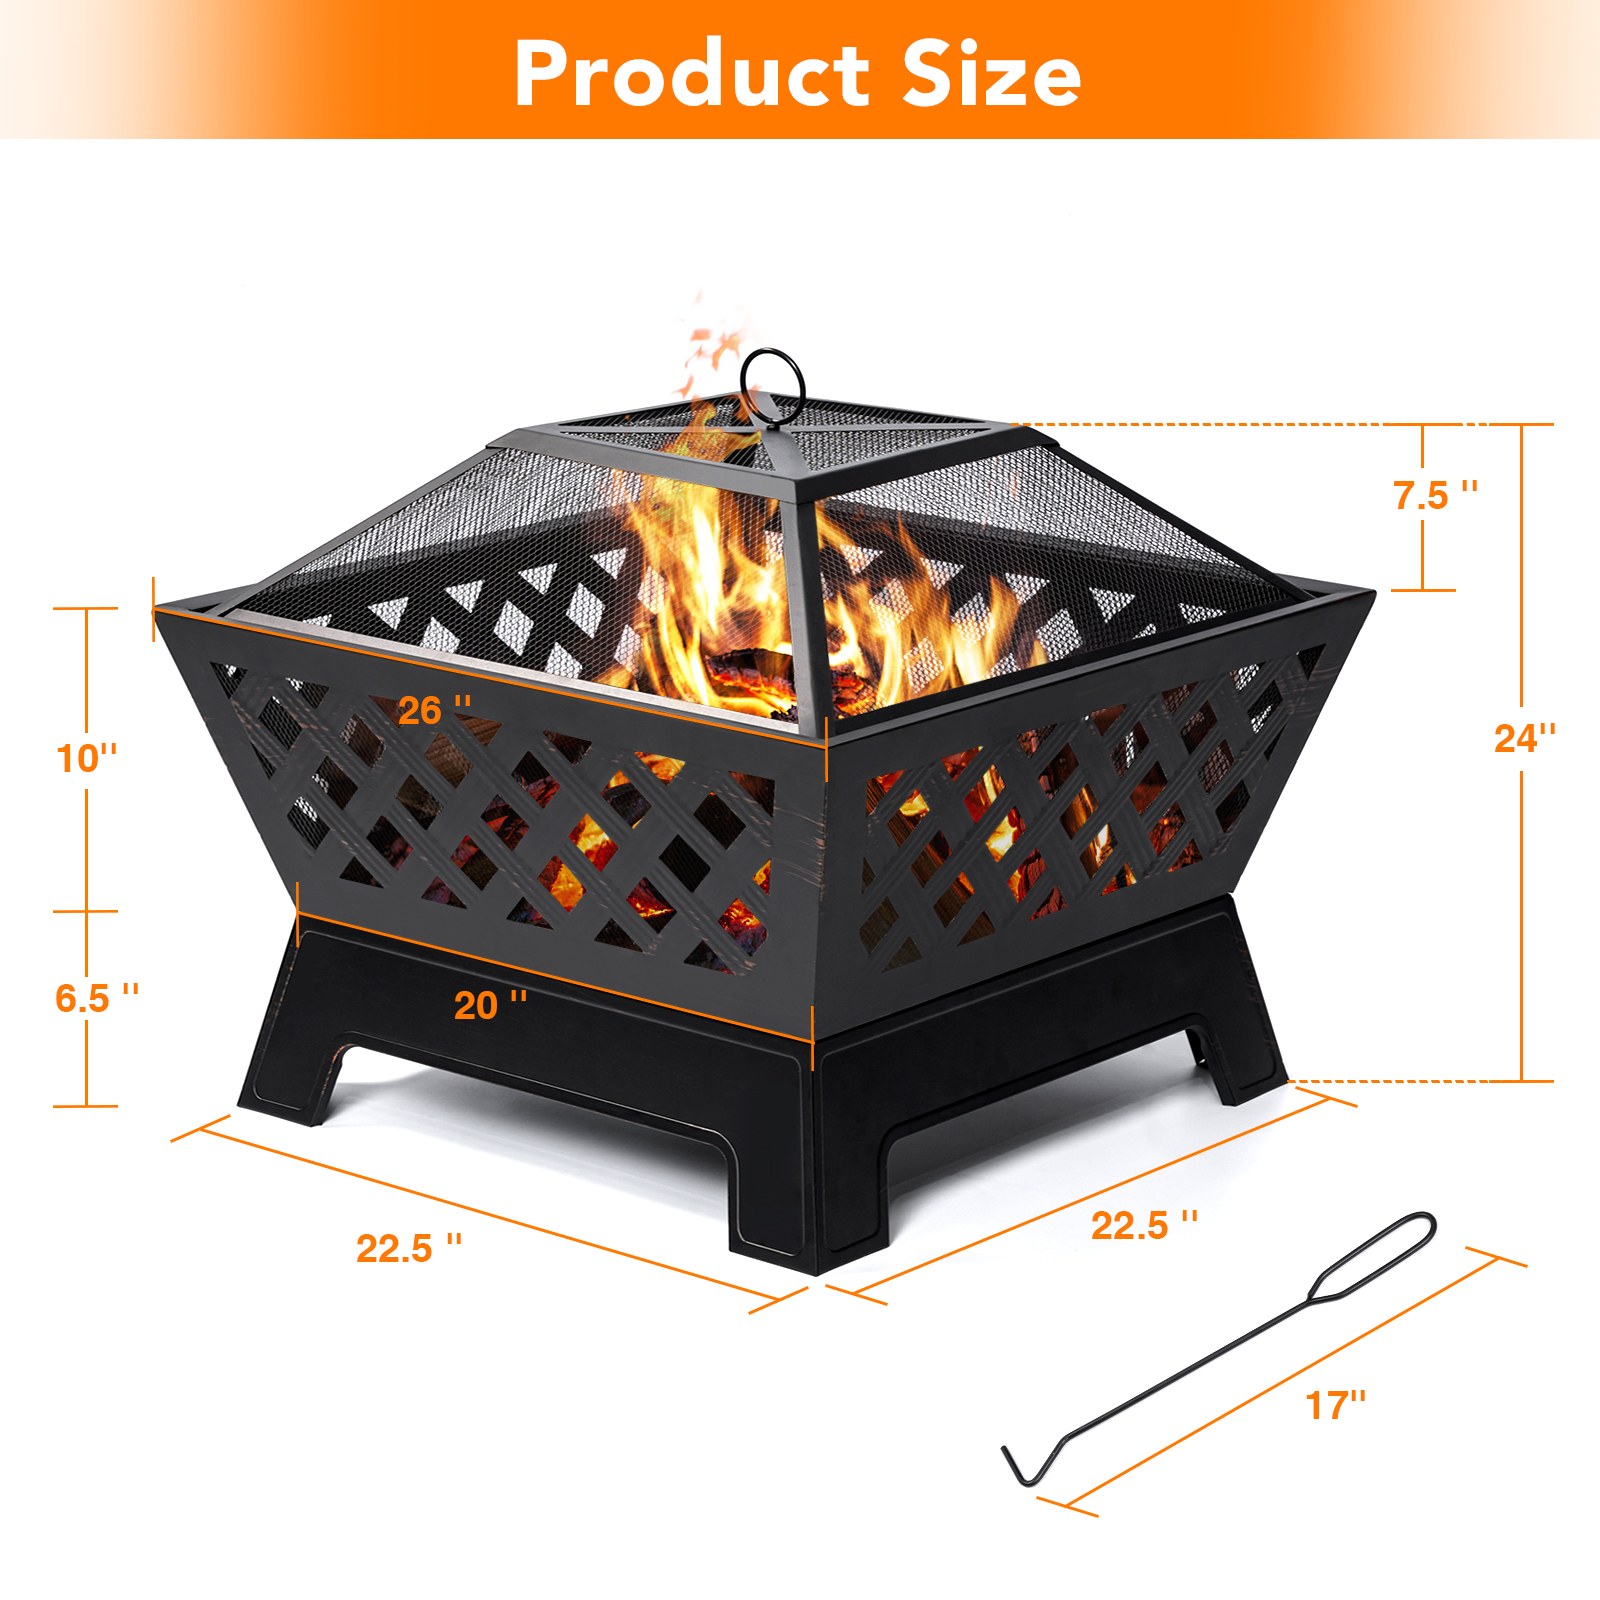 Kingso-26--Inch-Fire-Pits-Large-Wood-Burning-Square-Firepit-with-Ash-Plate-Spark-Screen-Log-Grate-Po-1920540-10